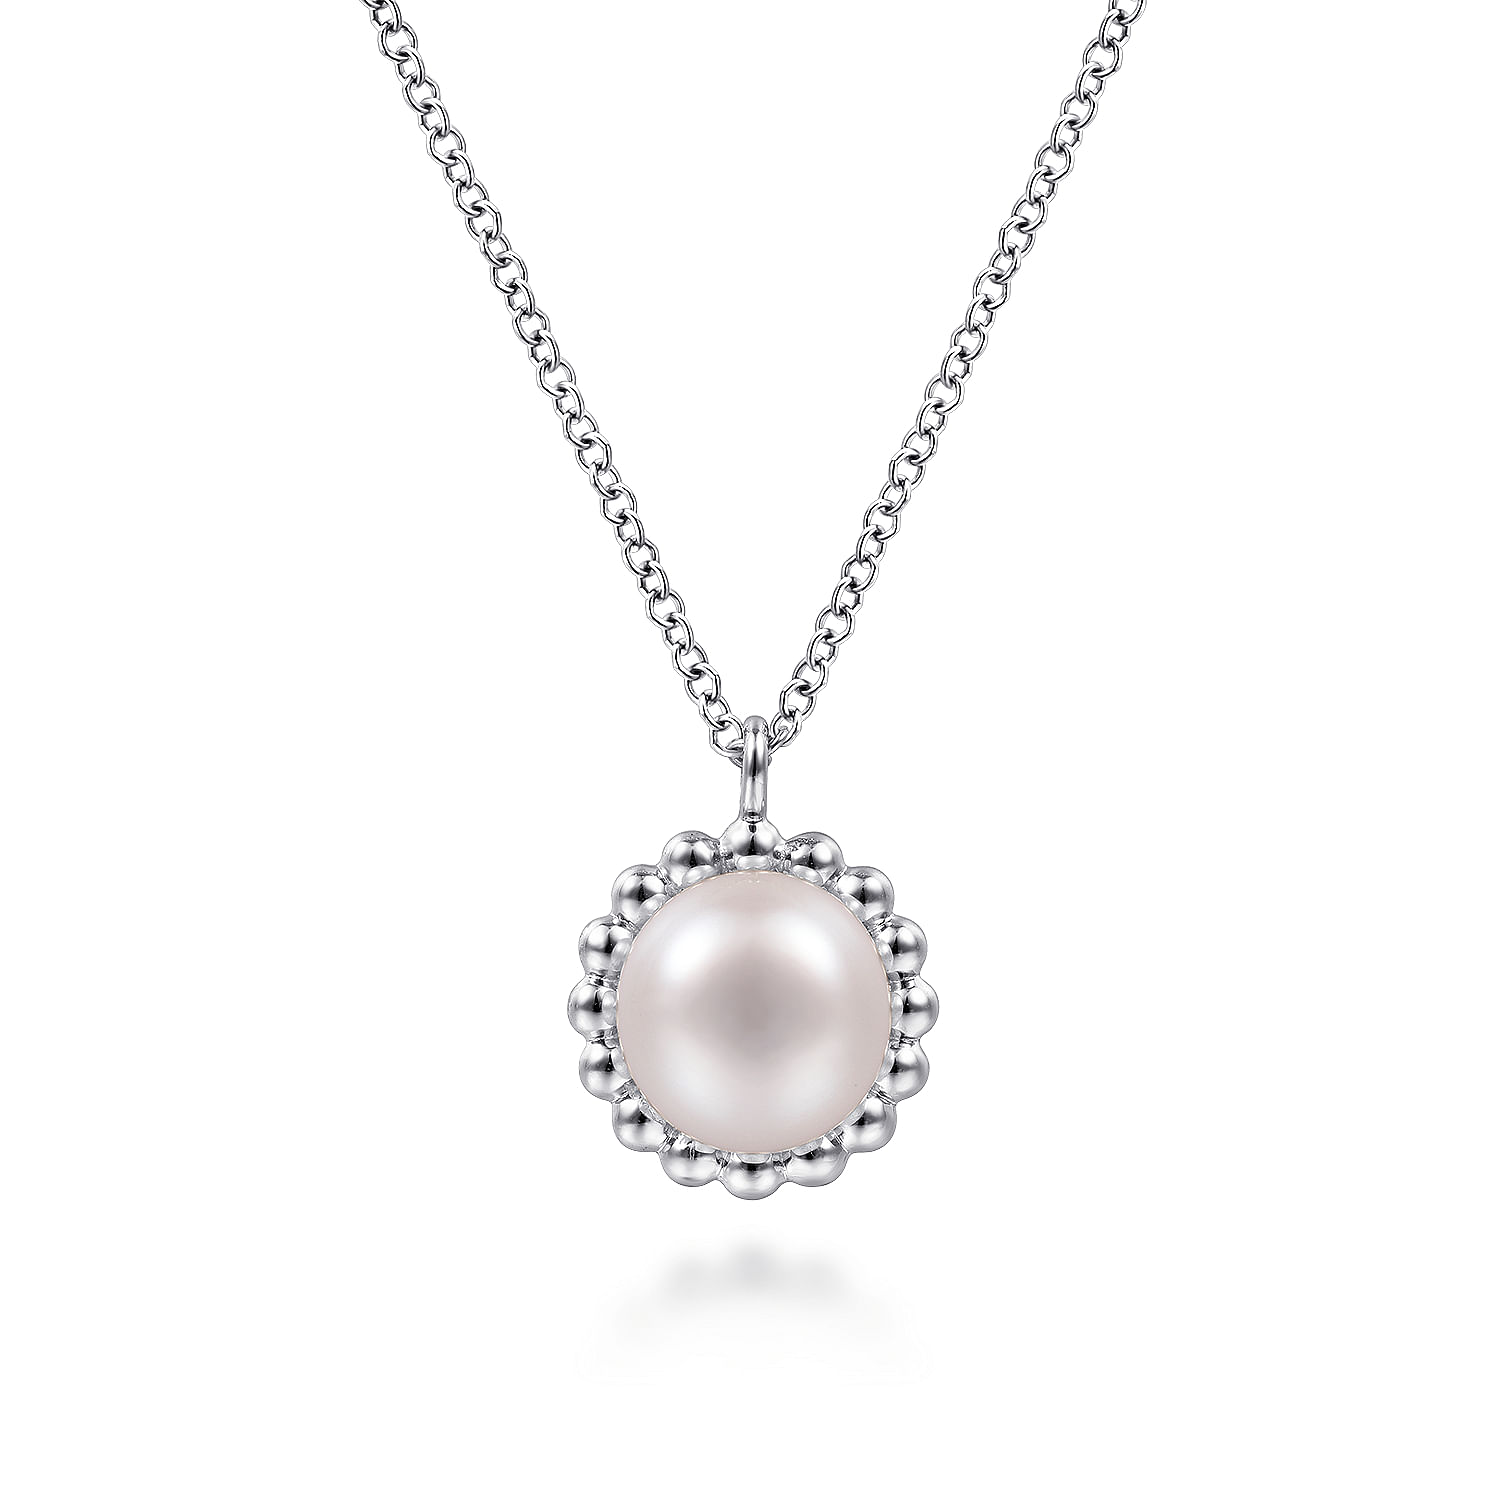 925 Sterling Silver Round Pearl Pendant Necklace with Beaded Frame